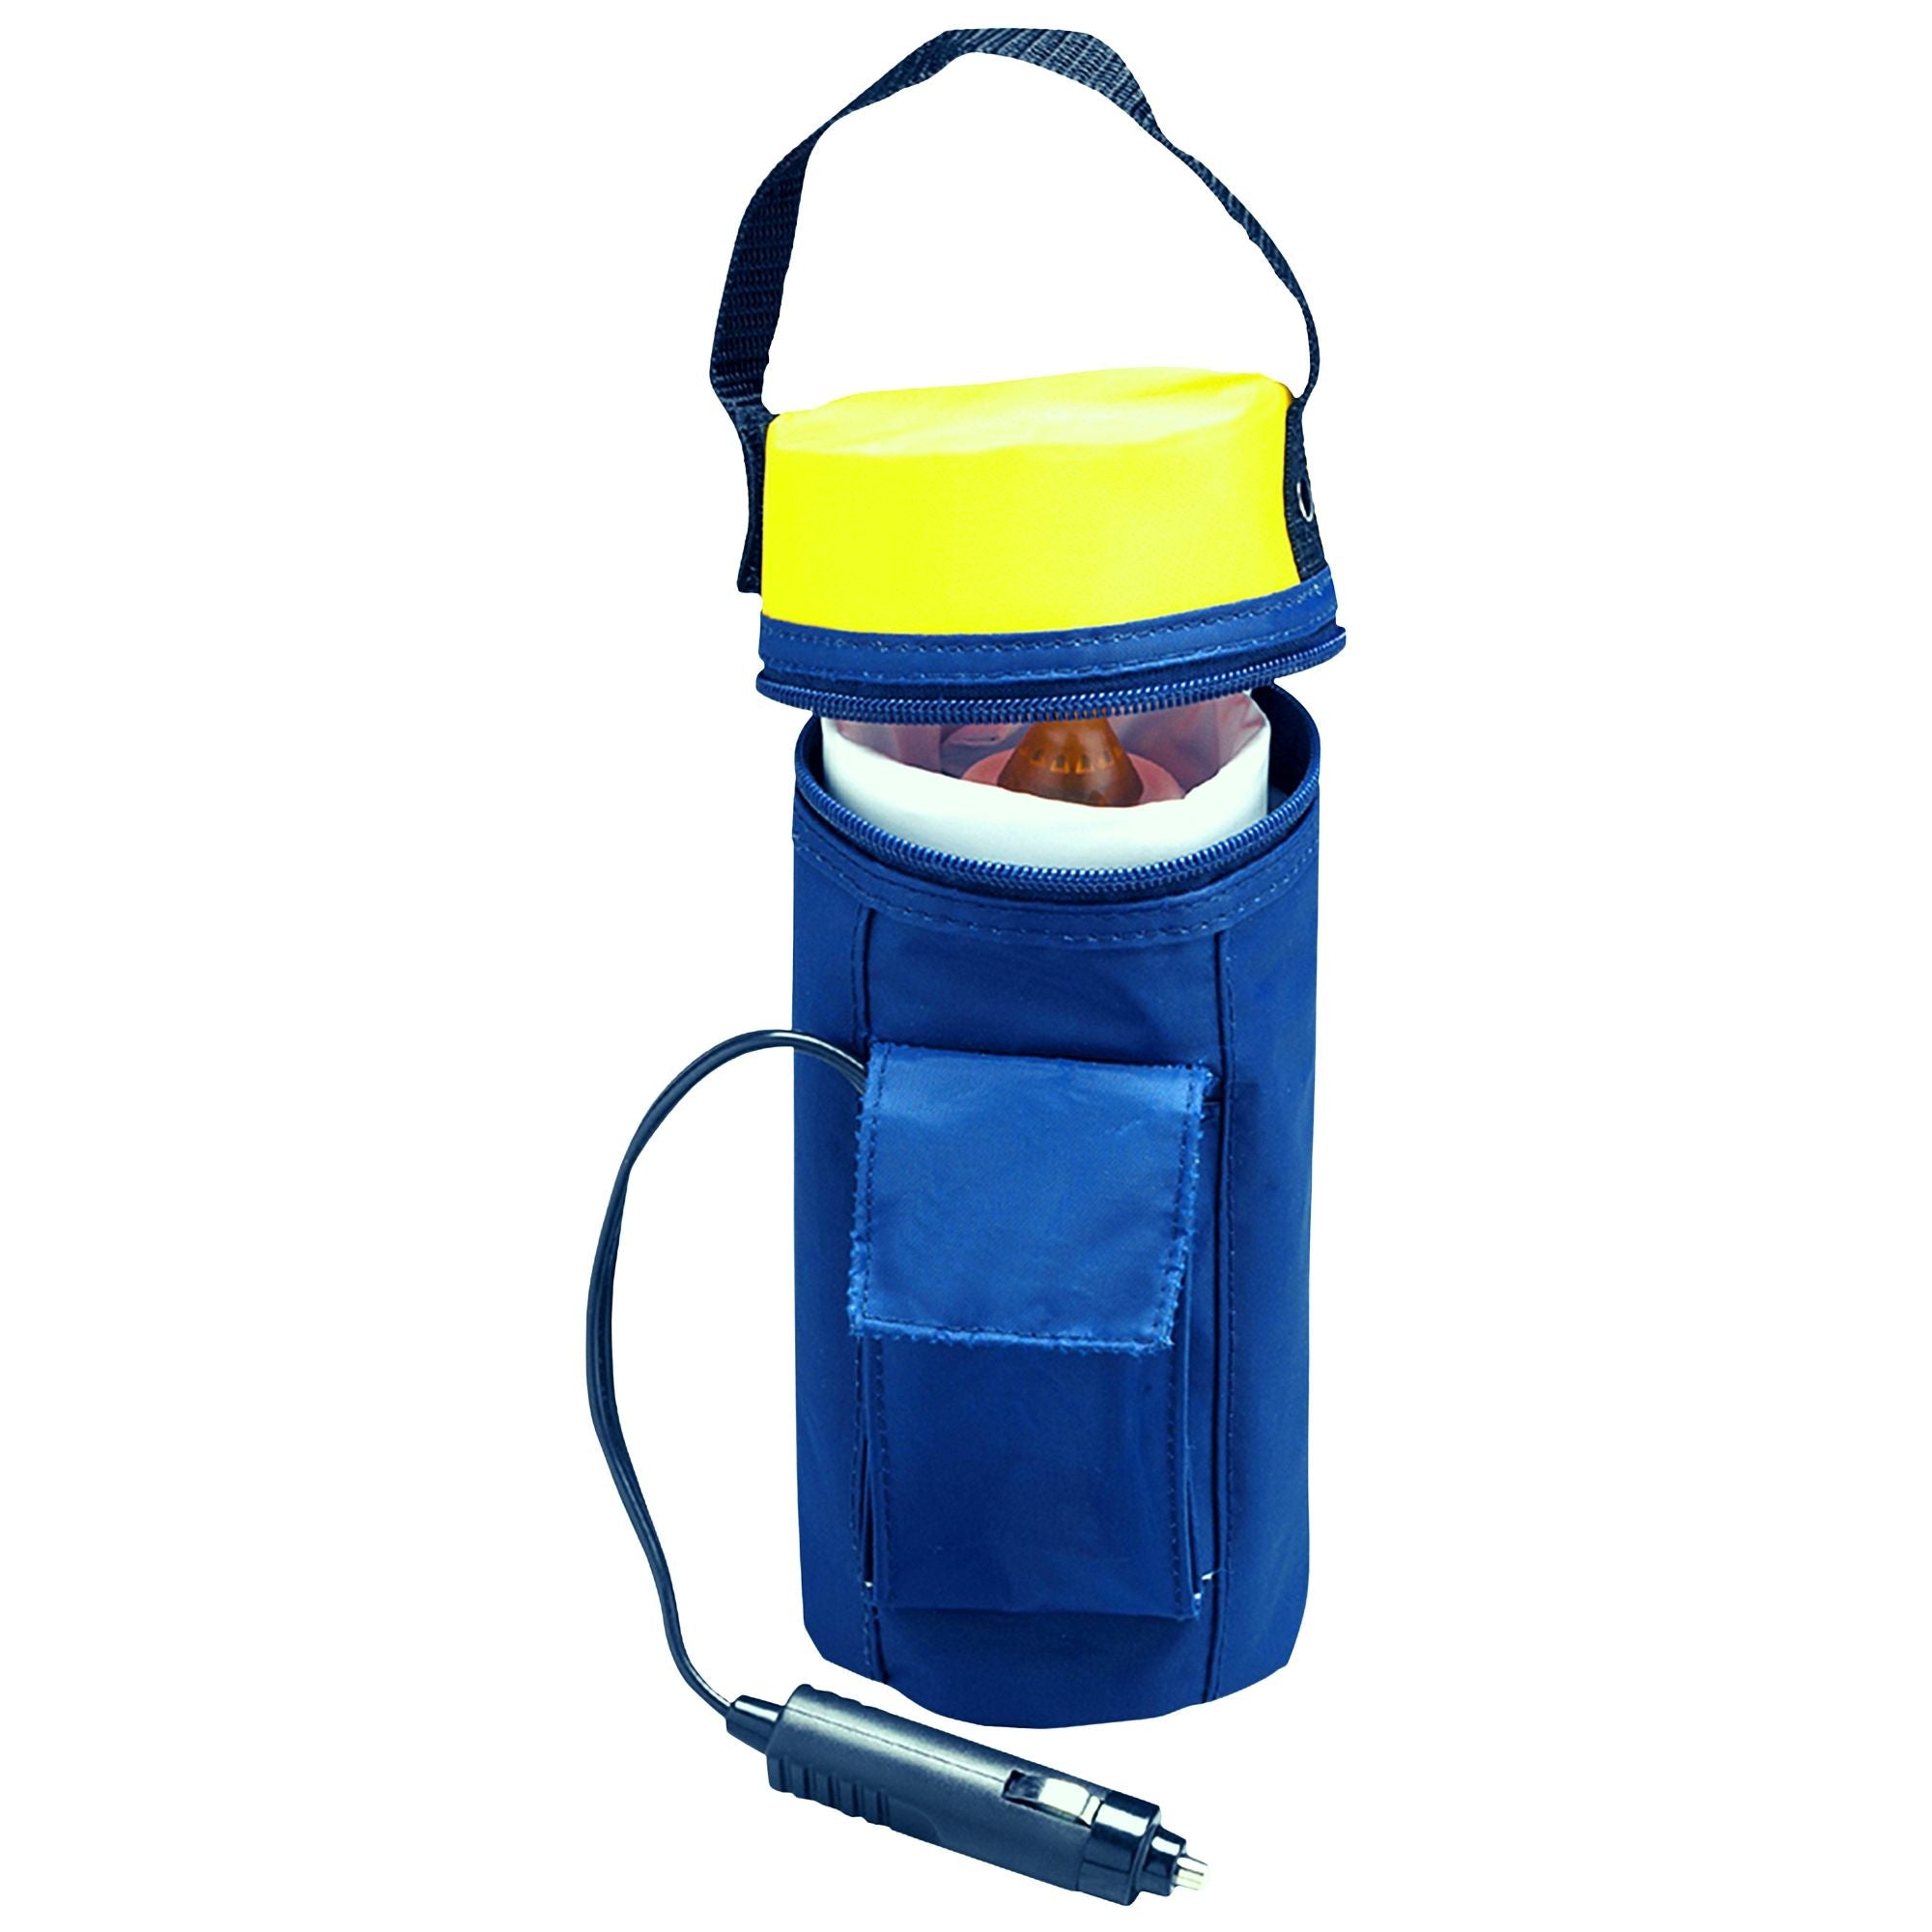 Product shot of 12V baby bottle warmer, partly open with a bottle inside, on a white background with 12V power cord visible